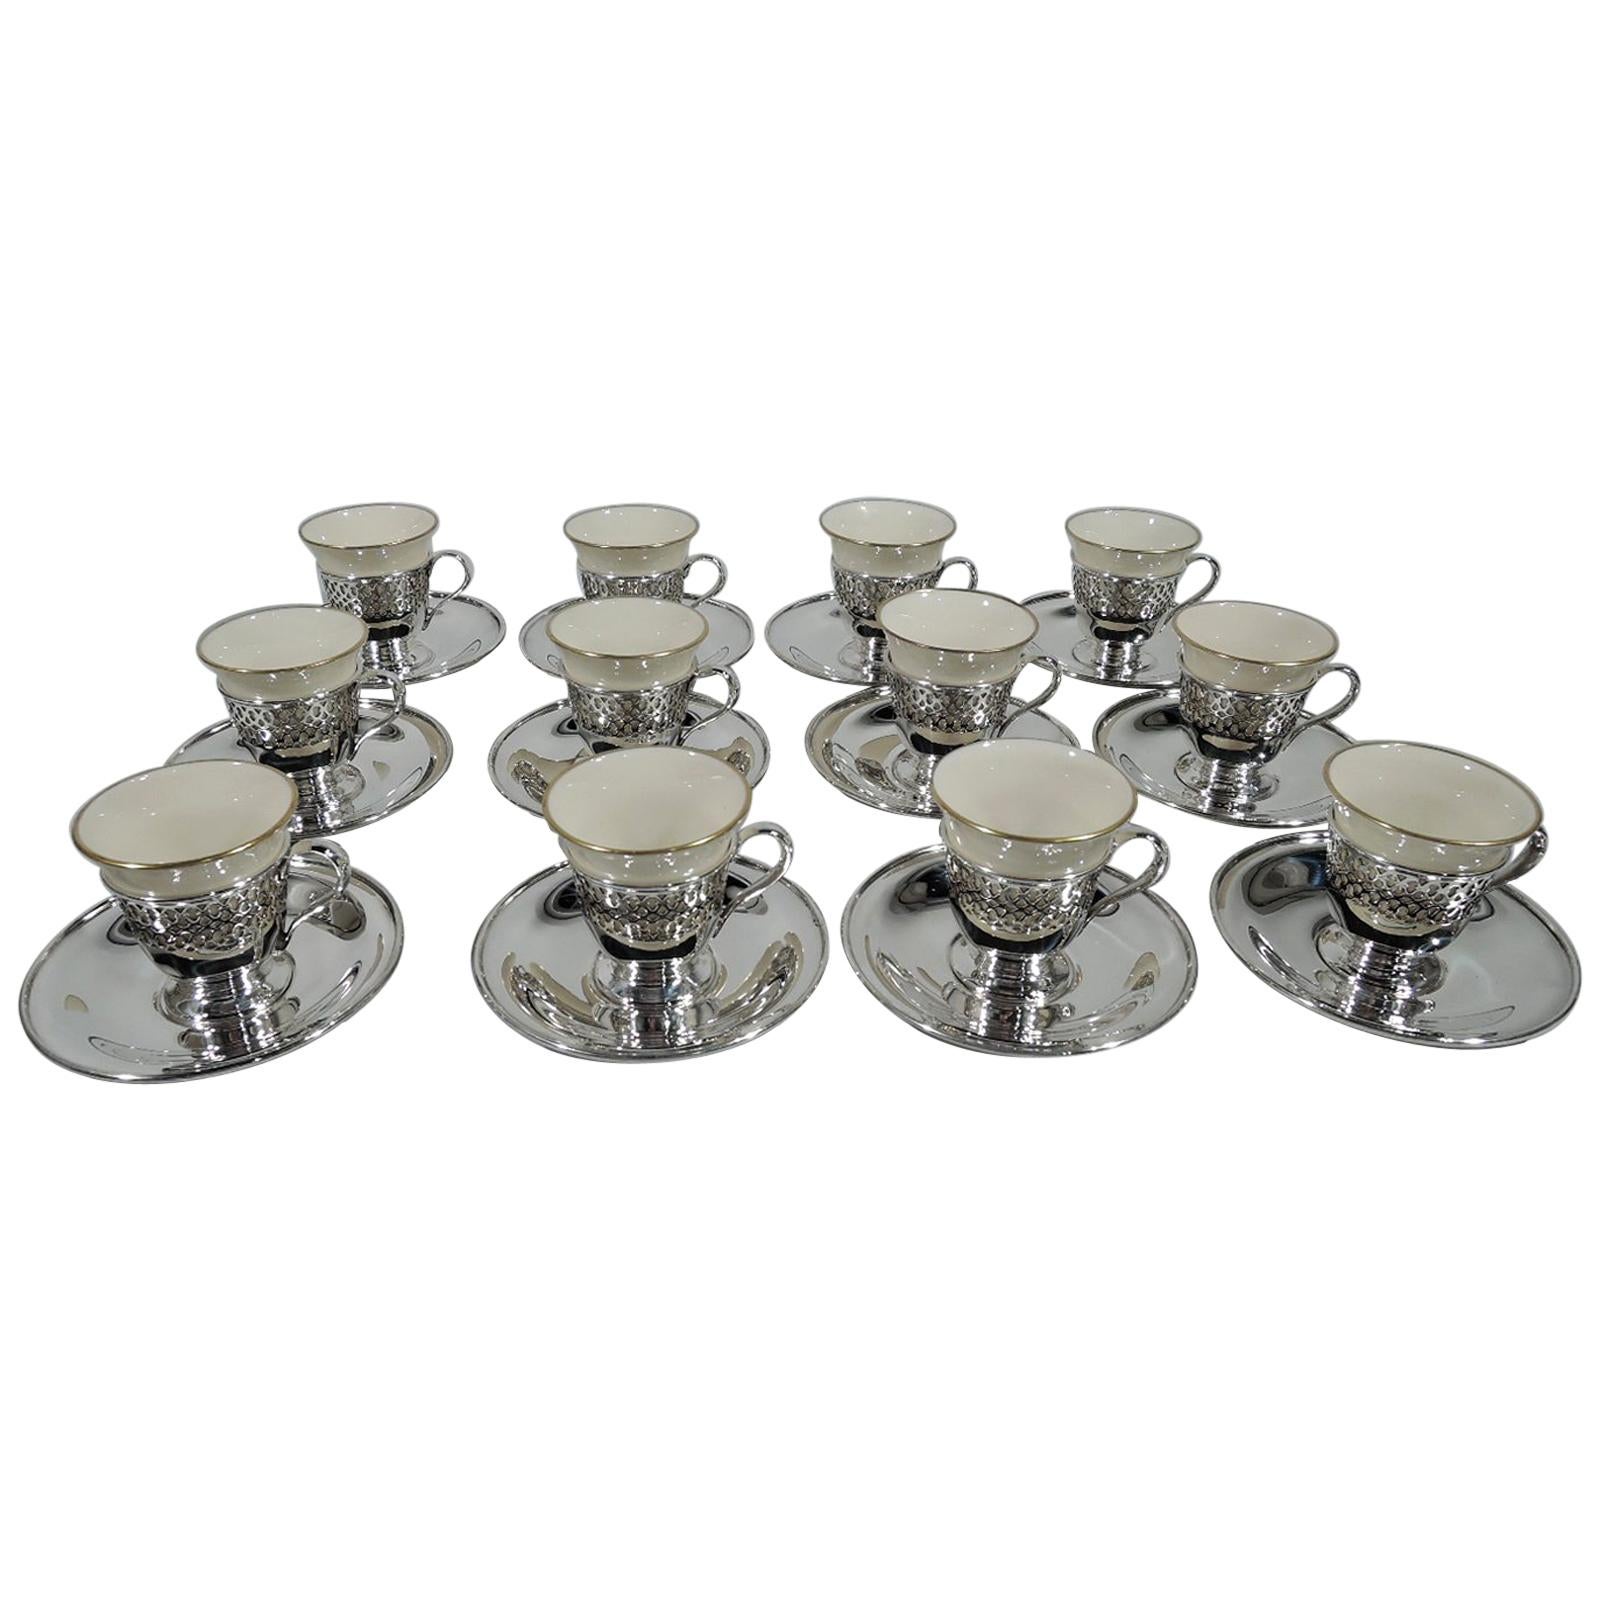 Set of 12 Tiffany Edwardian Sterling Silver Demitasse Holders with Lenox Liners